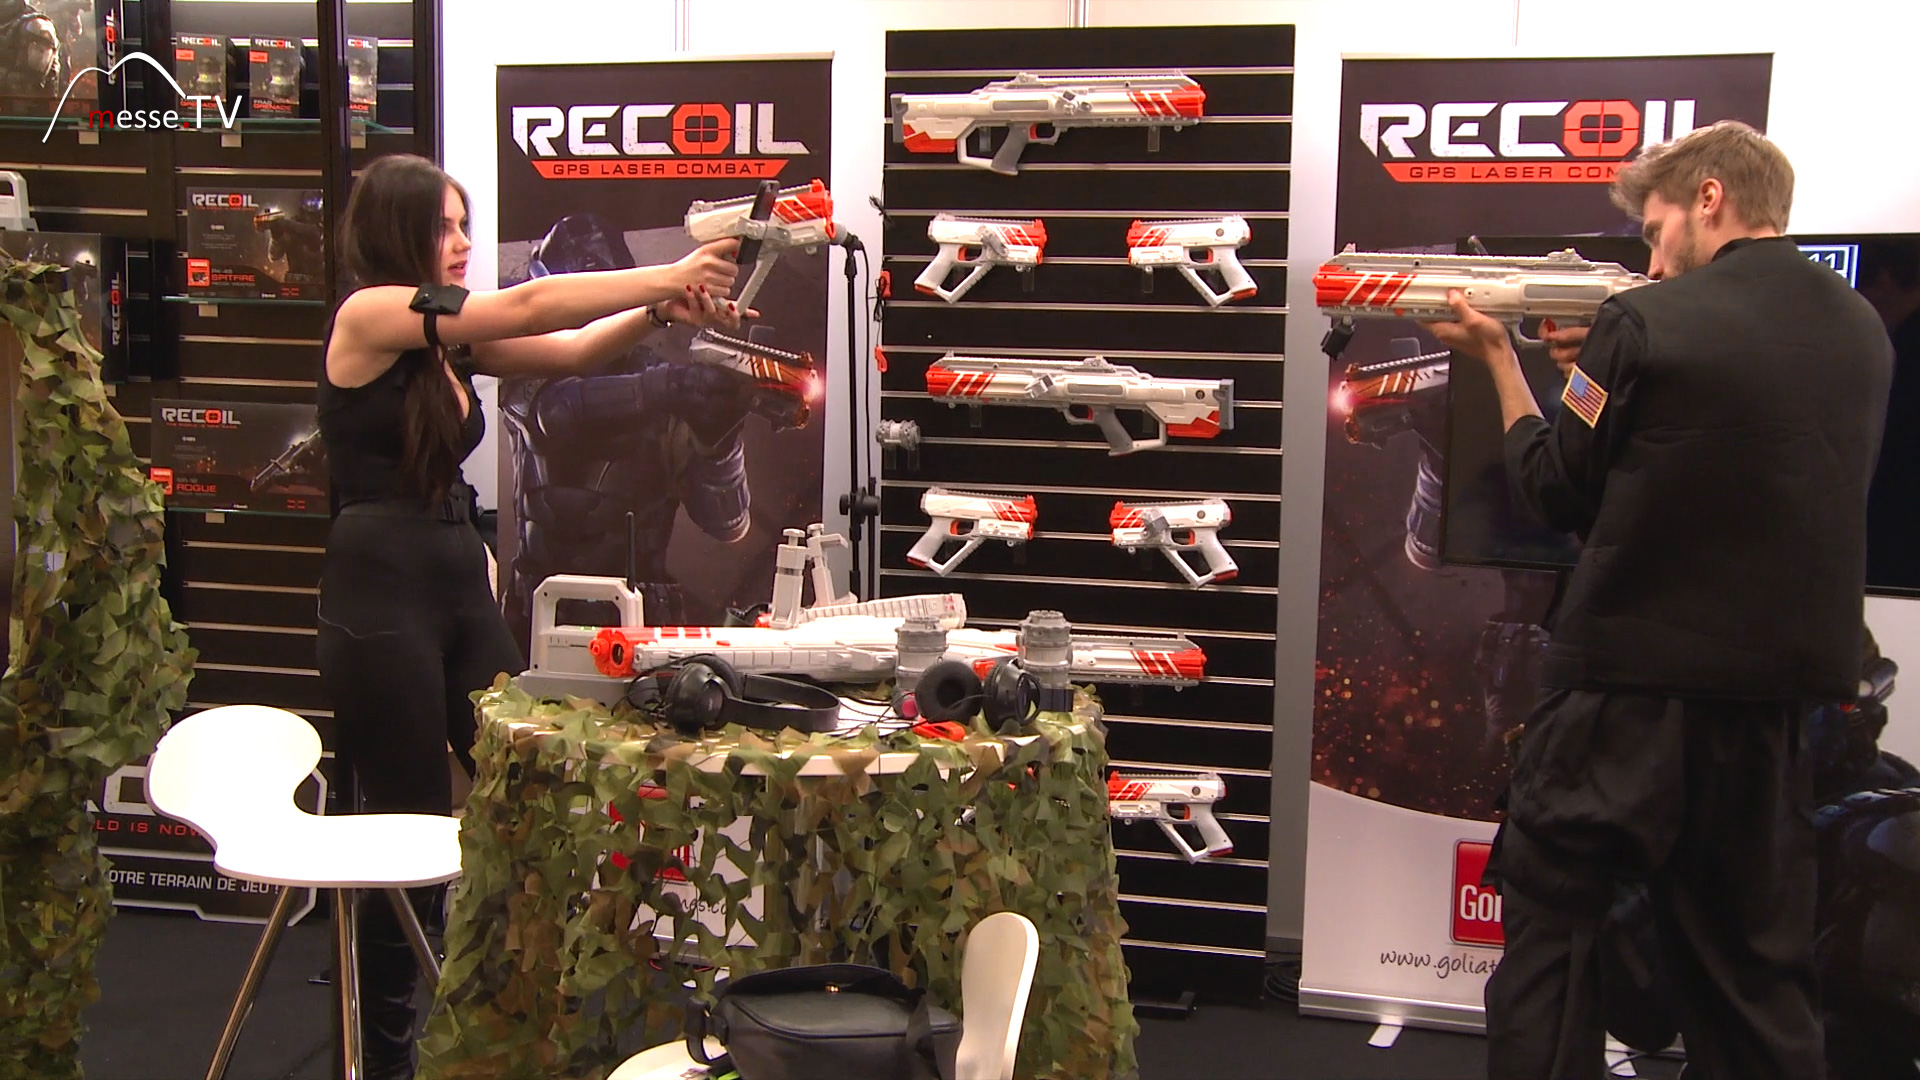 smartphone game shooting live rifle Recoil Goliath